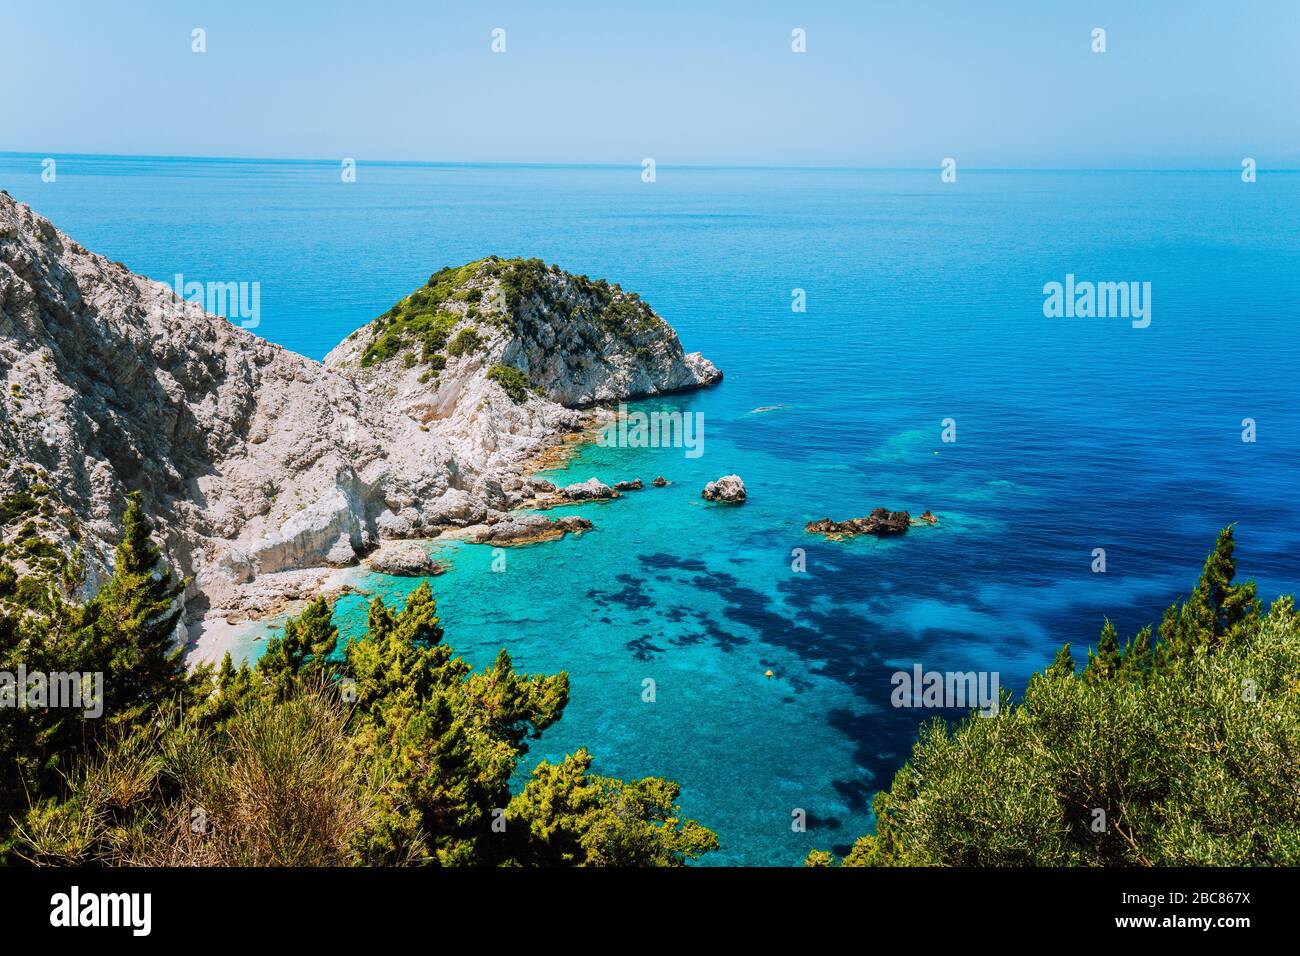 Page 2 - Eleni High Resolution Stock Photography and Images - Alamy